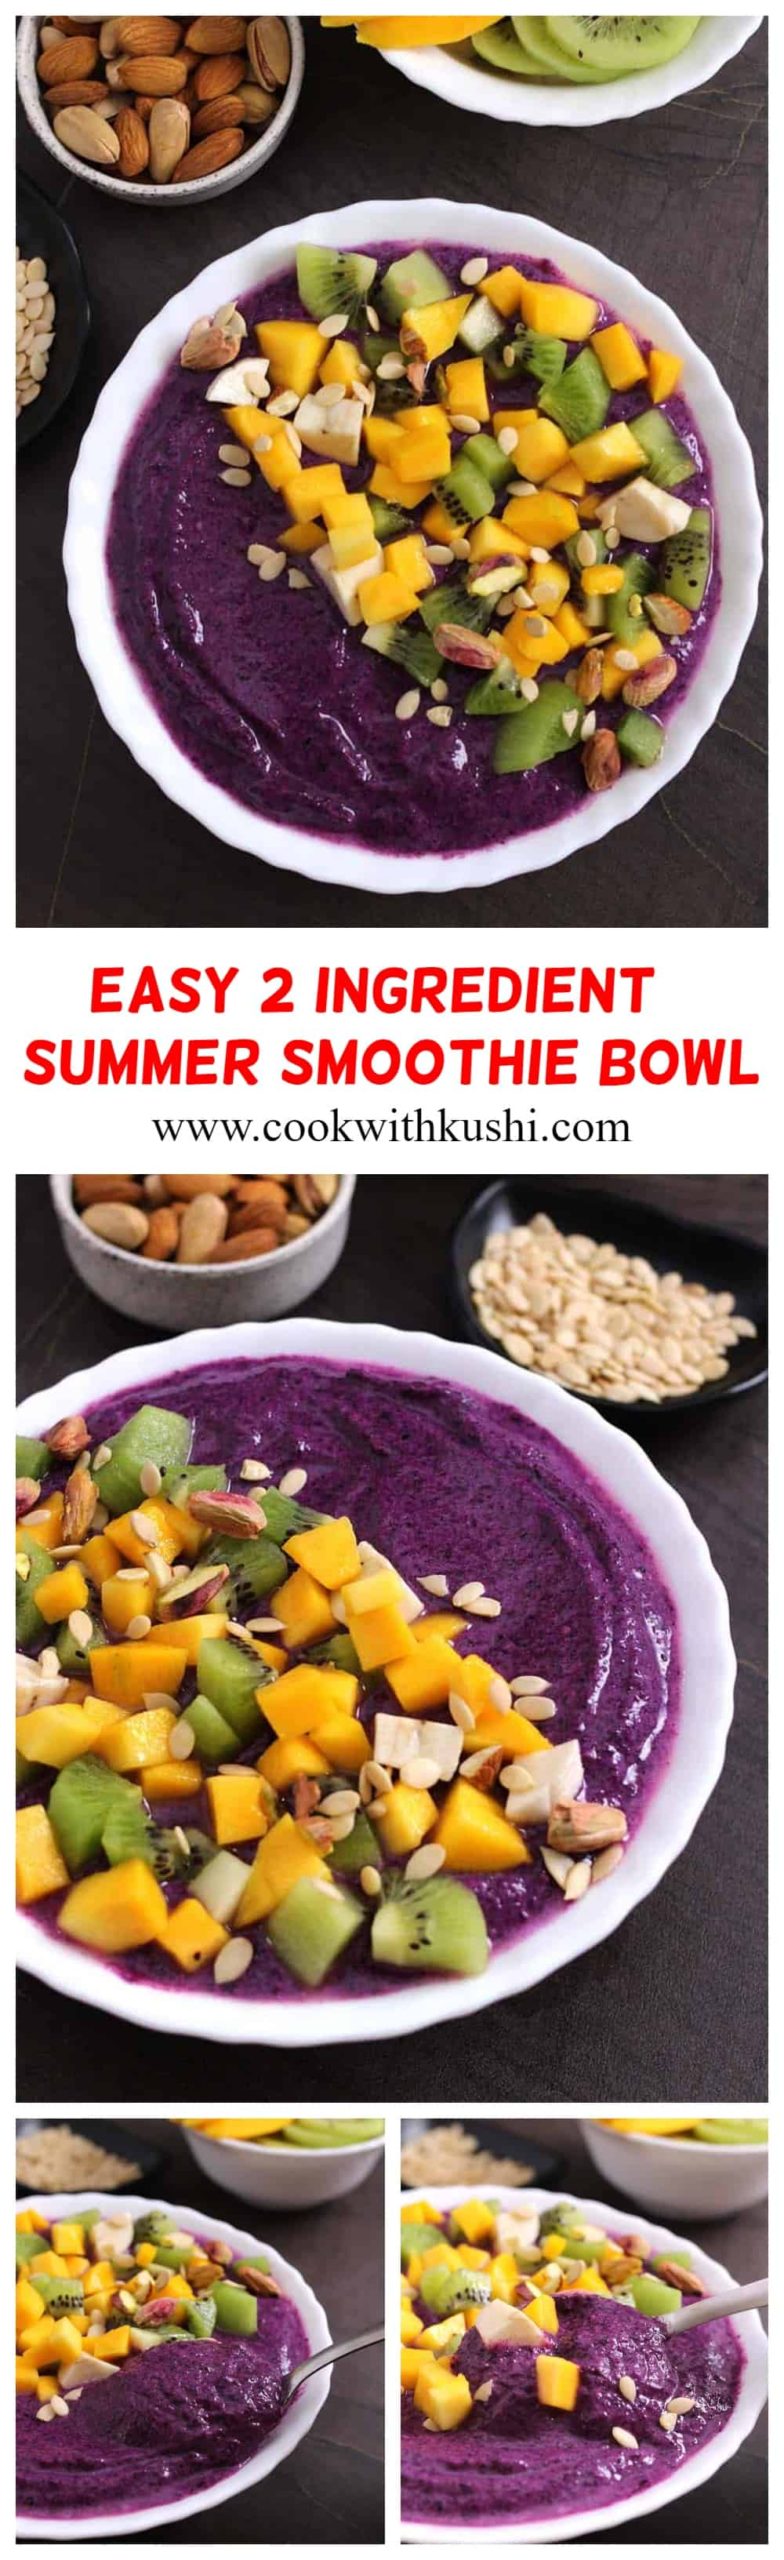 Black Plum Smoothie Bowl or Jamun Smoothie bowl is a refreshing and delicious, healthy and nutritious recipe for the summer season prepared using just 2 ingredients in less than 5 minutes. This can be served for breakfast, brunch, or even as a mid-day snack. #smoothiebowl #acaibowl #fruitsmoothie #berrybowl #summerfood #summerbreakfast #fatburningfood #weightlossfood #blackplum #blackberry #jamun 